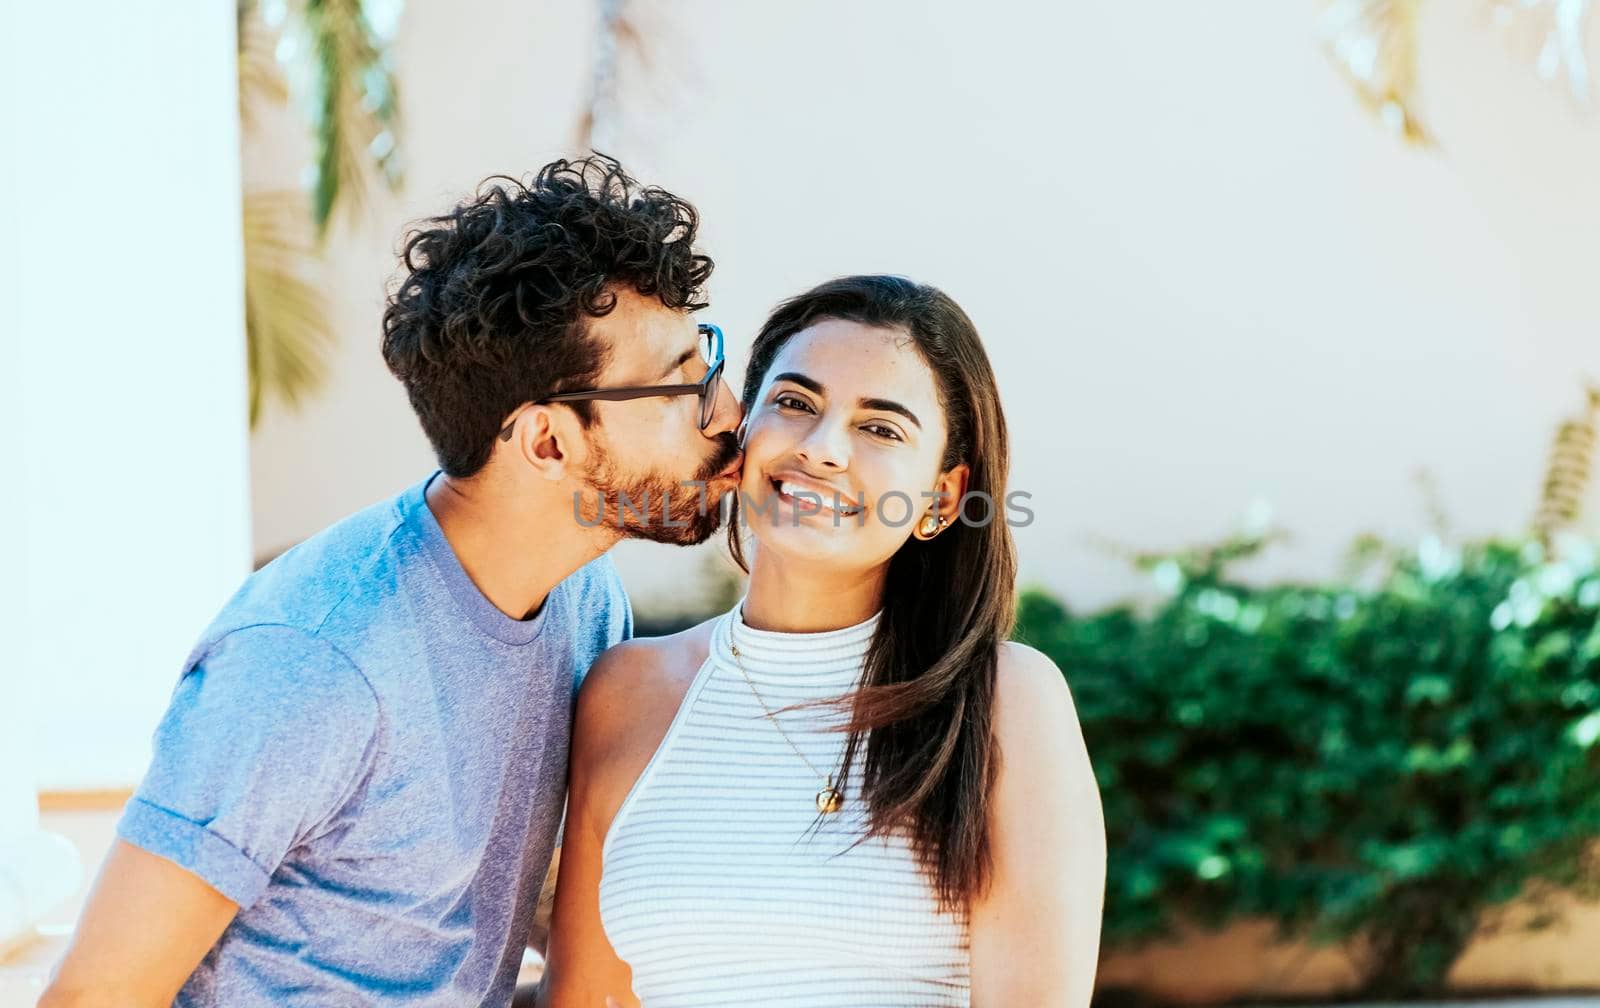 Boyfriend kissing his girlfriend on the cheek while smiling. Young man kissing his girlfriend on the cheek while smiling. Guy kissing his girlfriend cheek and she smiles by isaiphoto